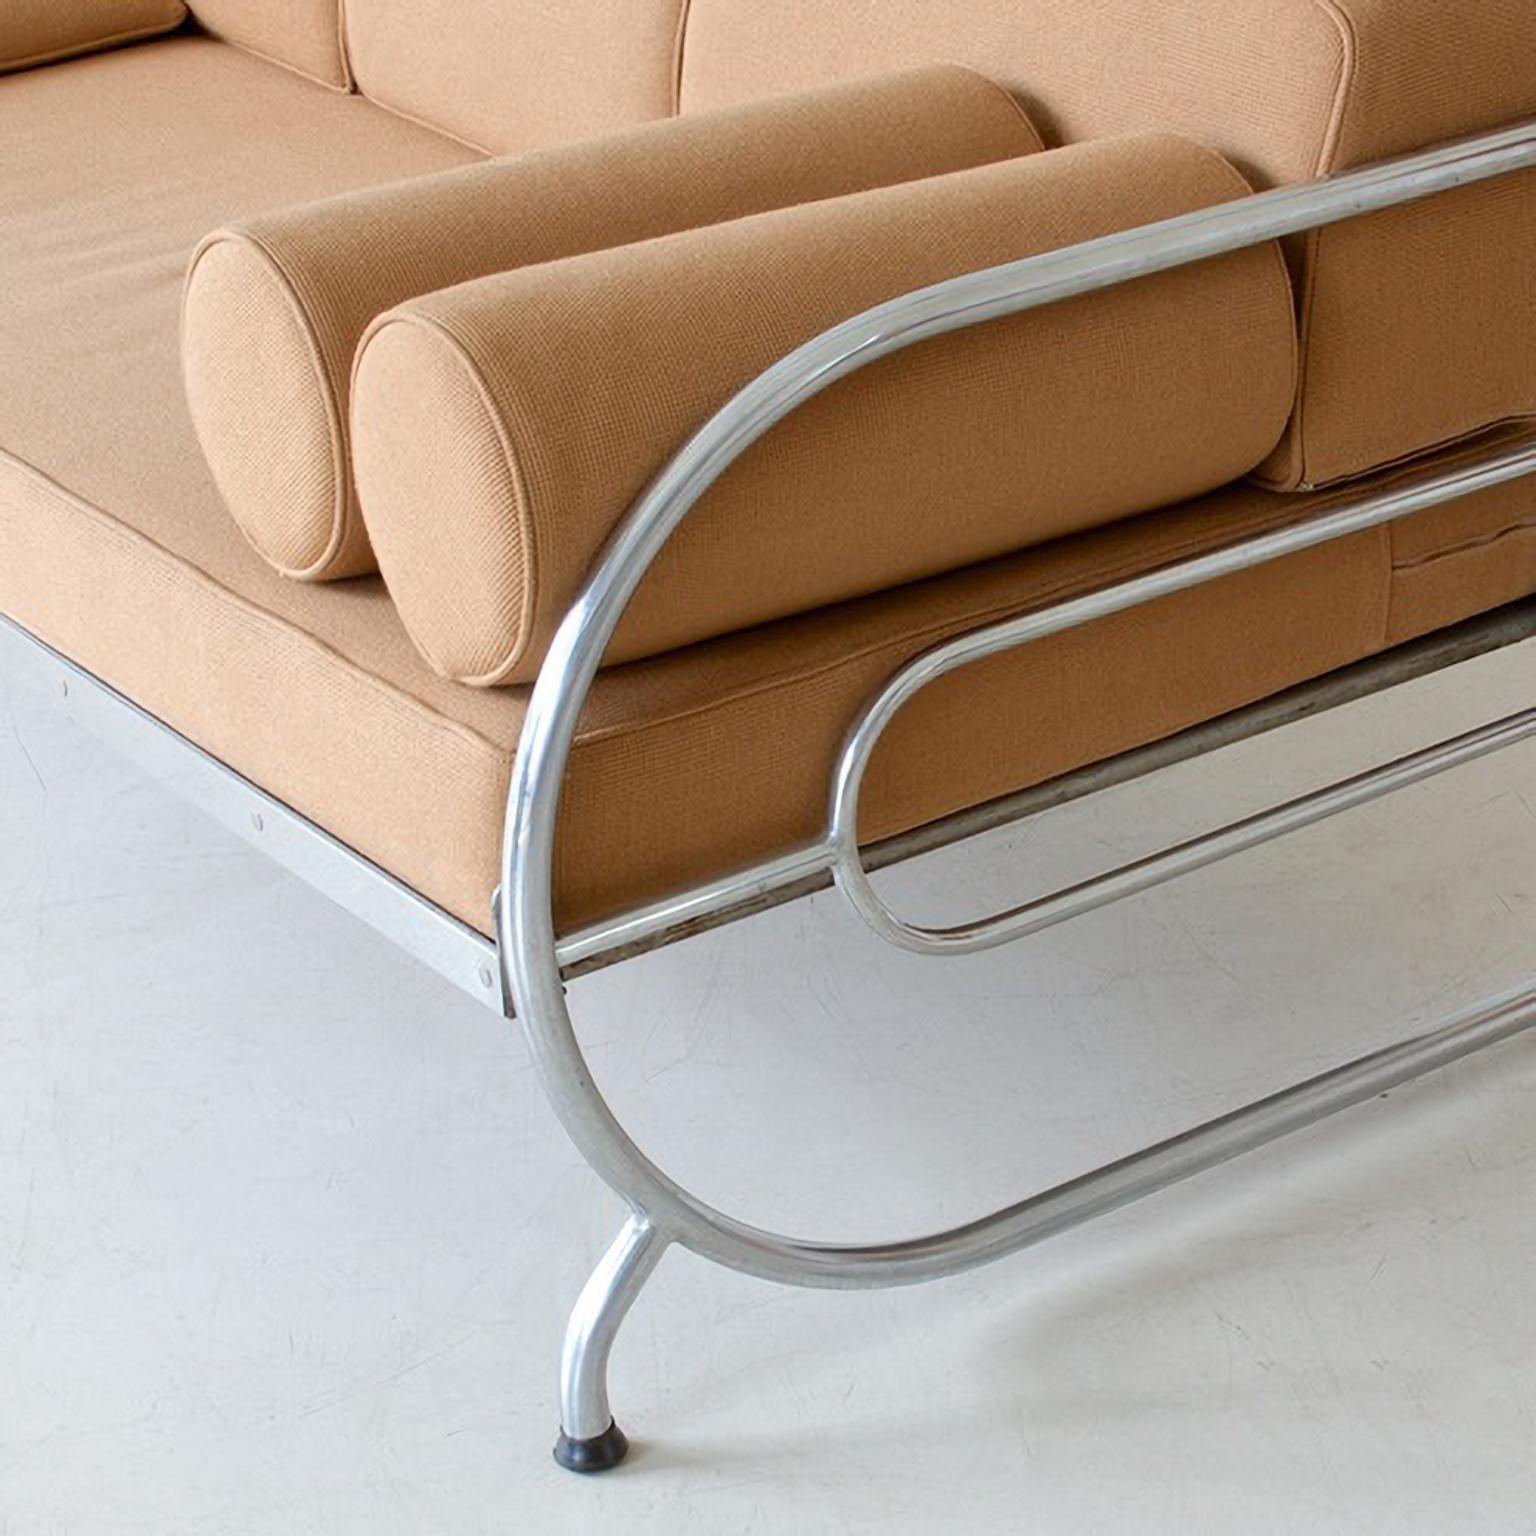 Lacquered Tubular Steel Couch / Daybed in Art Deco Streamline Design, circa 1930 For Sale